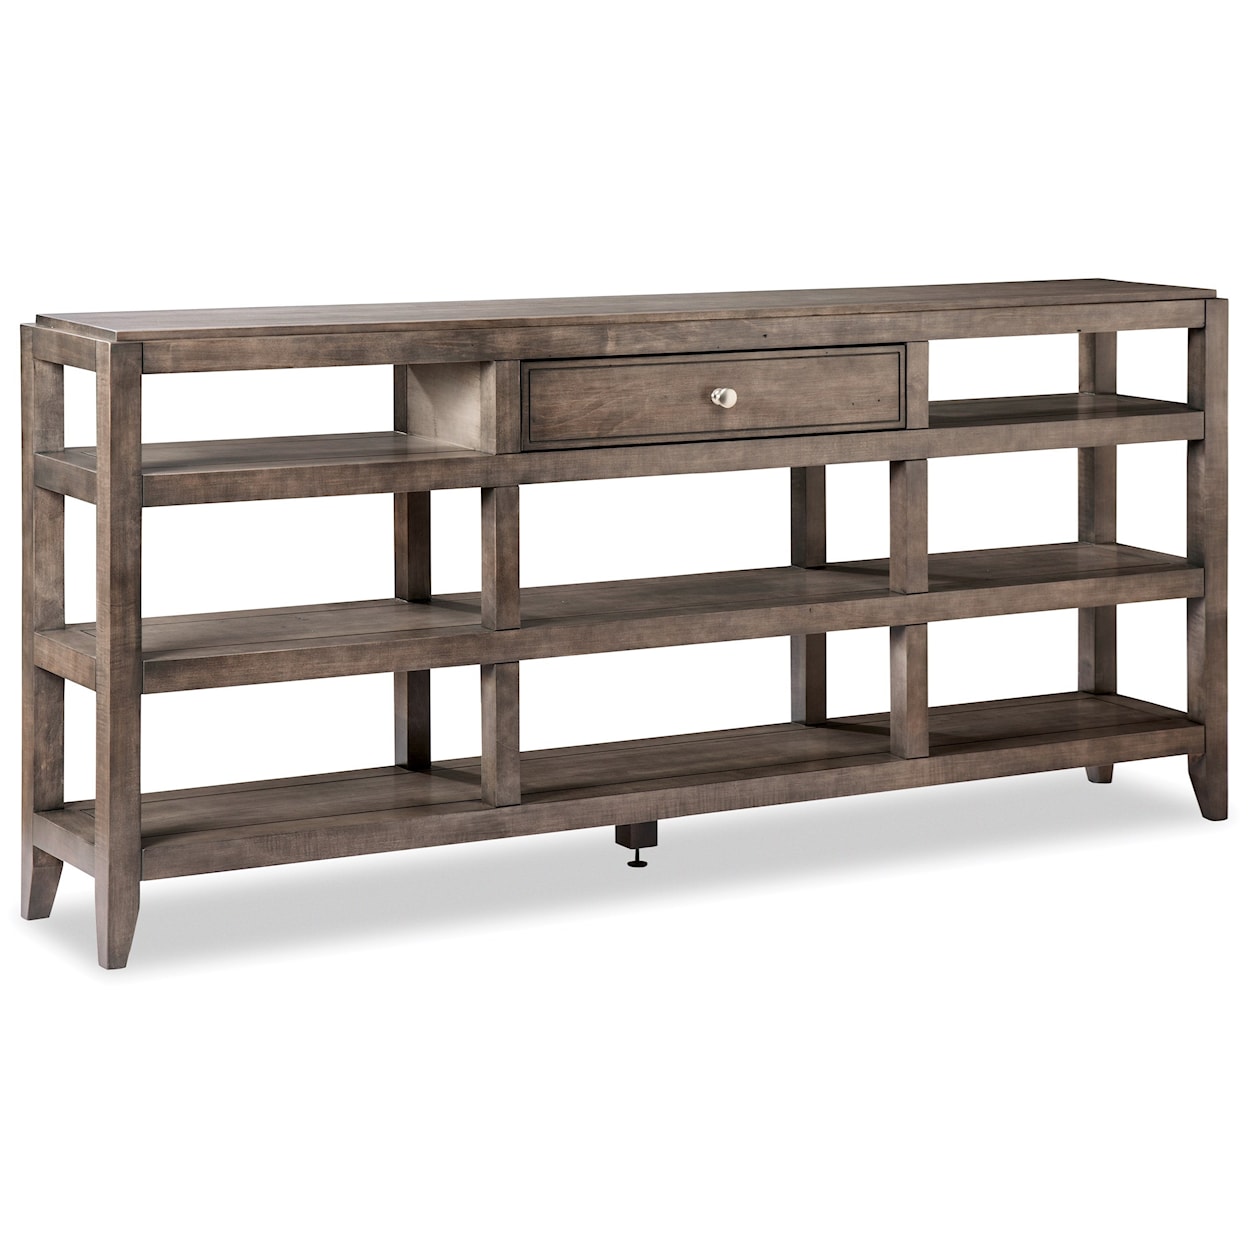 Durham Solid Accents Customizable Open Console Cabinet